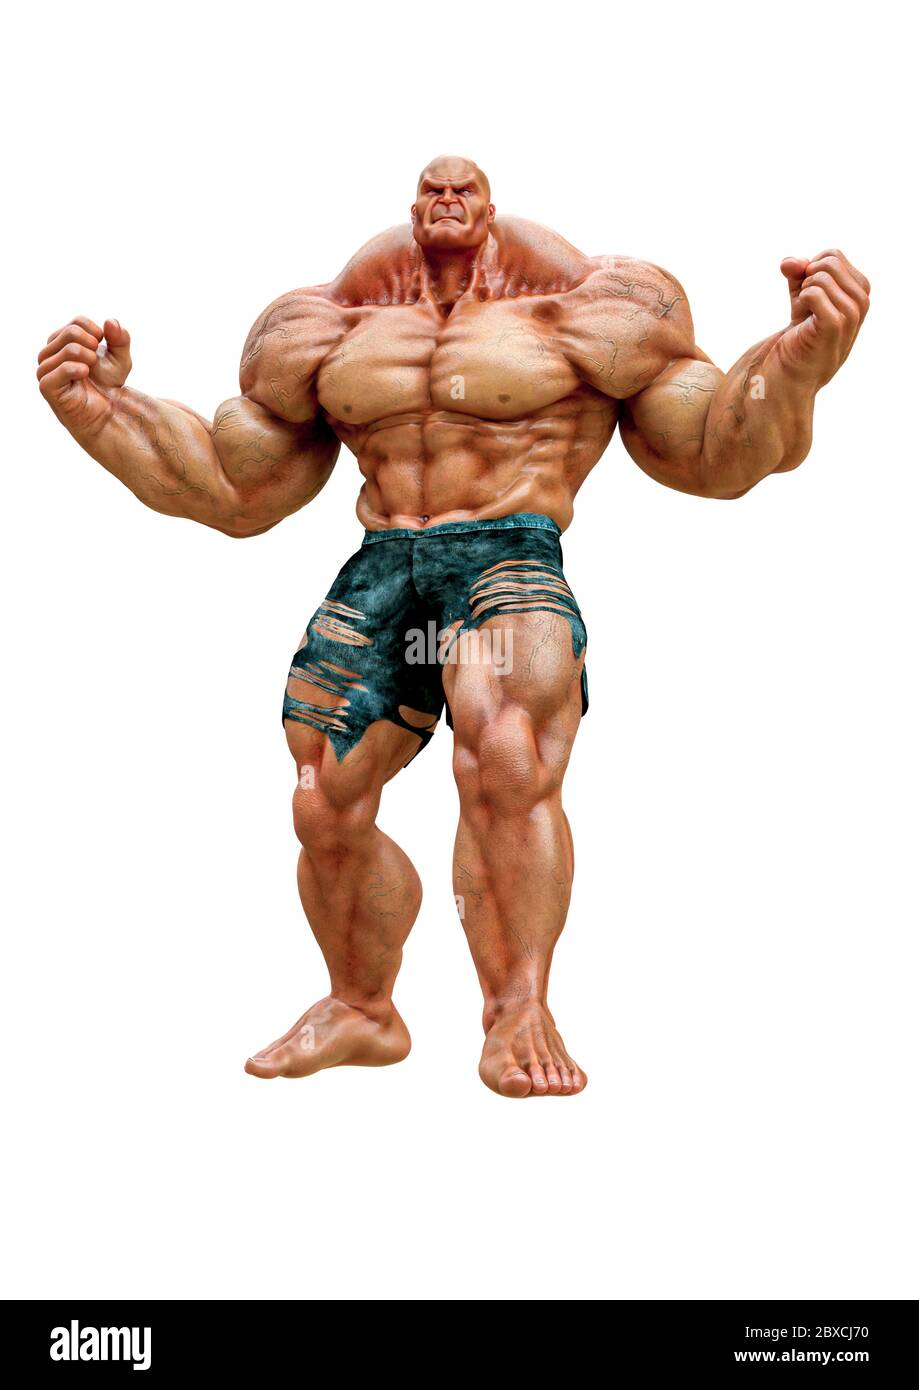 super muscleman will smash your face in a white background. This muscle man  in clipping path is very useful for graphic design creations, 3d illustrat  Stock Photo - Alamy